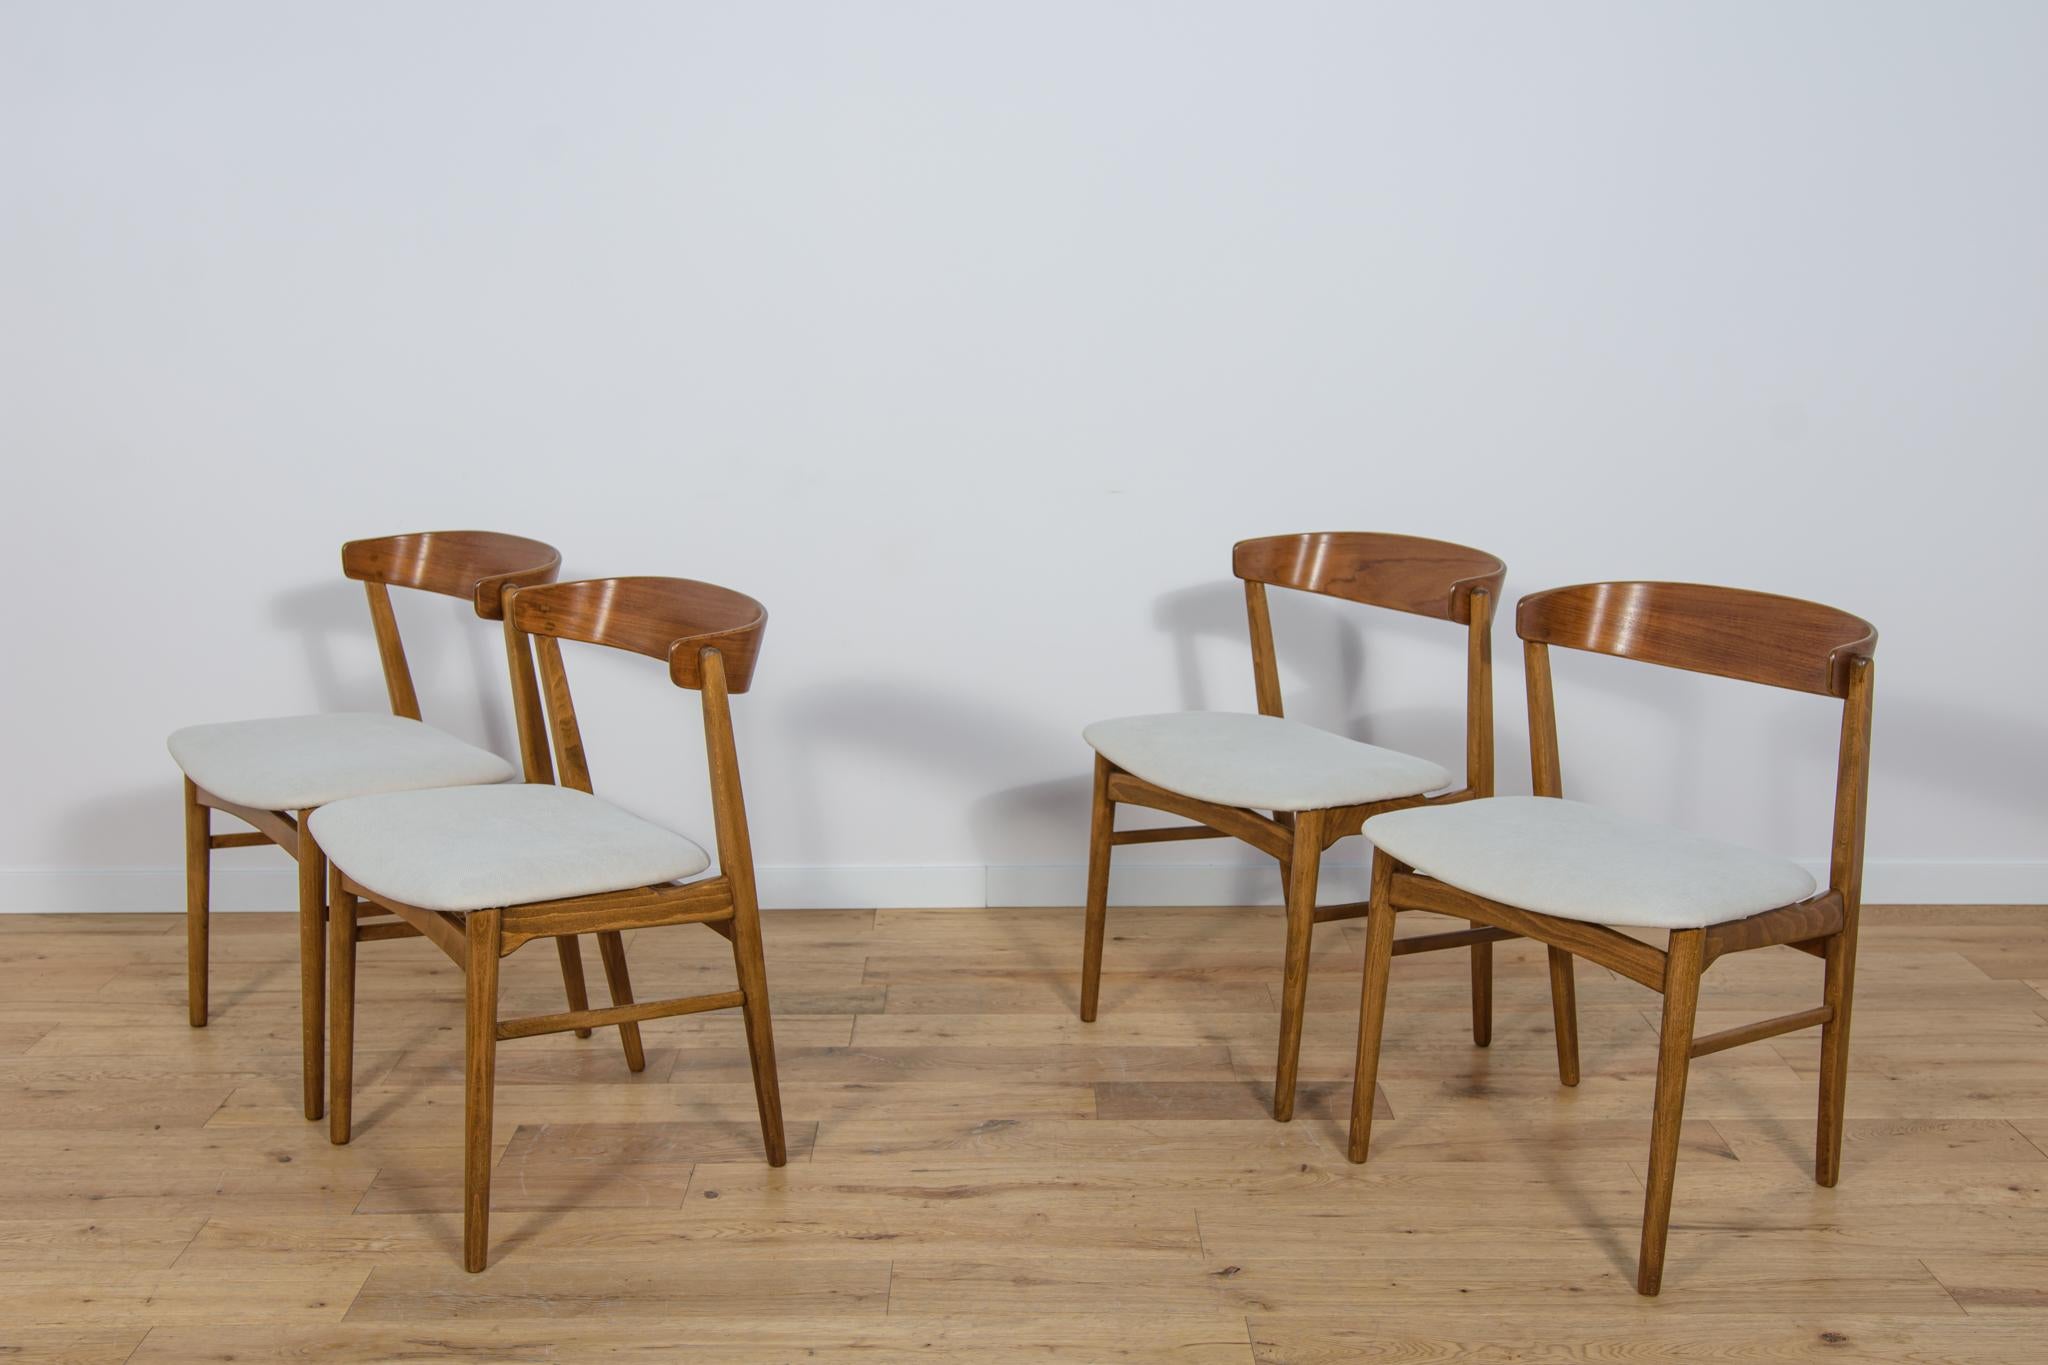 Woodwork Mid-Century Model 206 Dining Chairs from Farstrup Furniture, 1960s, Denmark. For Sale